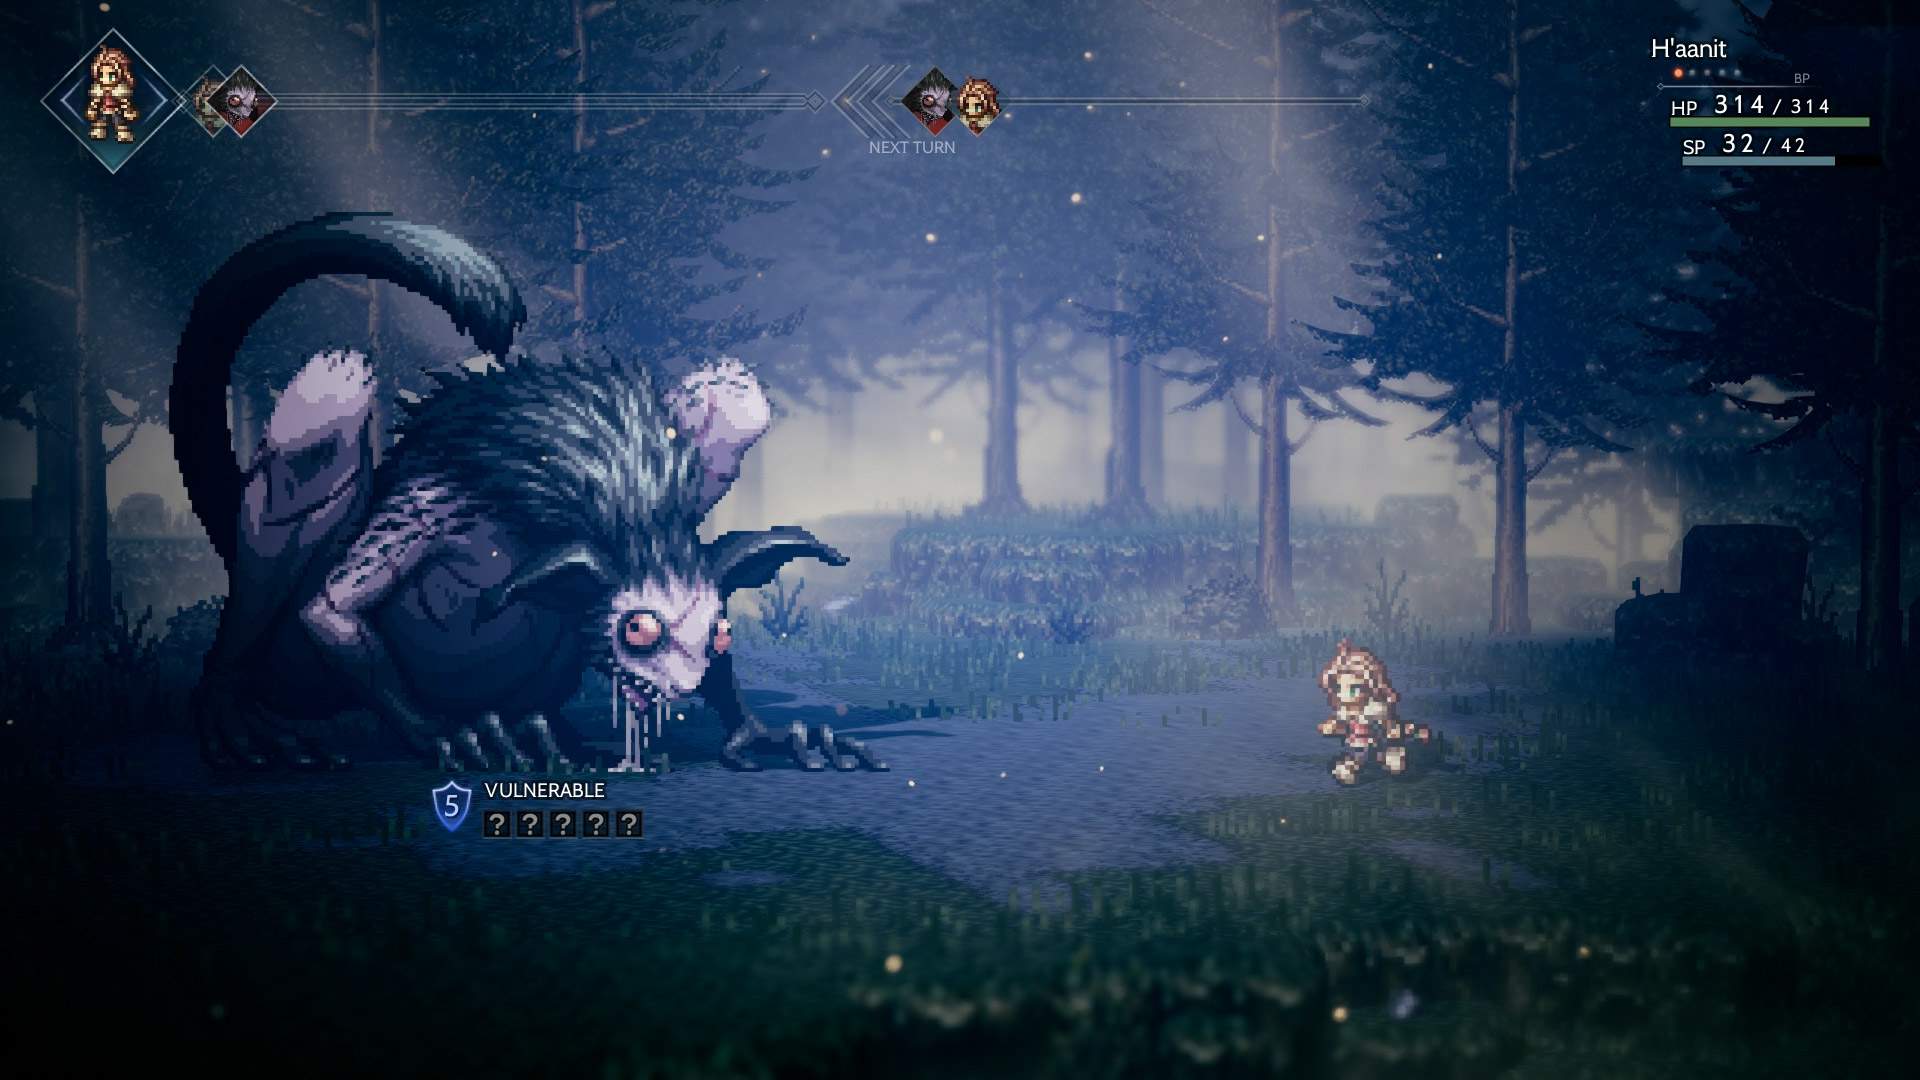 In game battle screenshot showing H'aanit in turn based battle against a large monster in a forest.